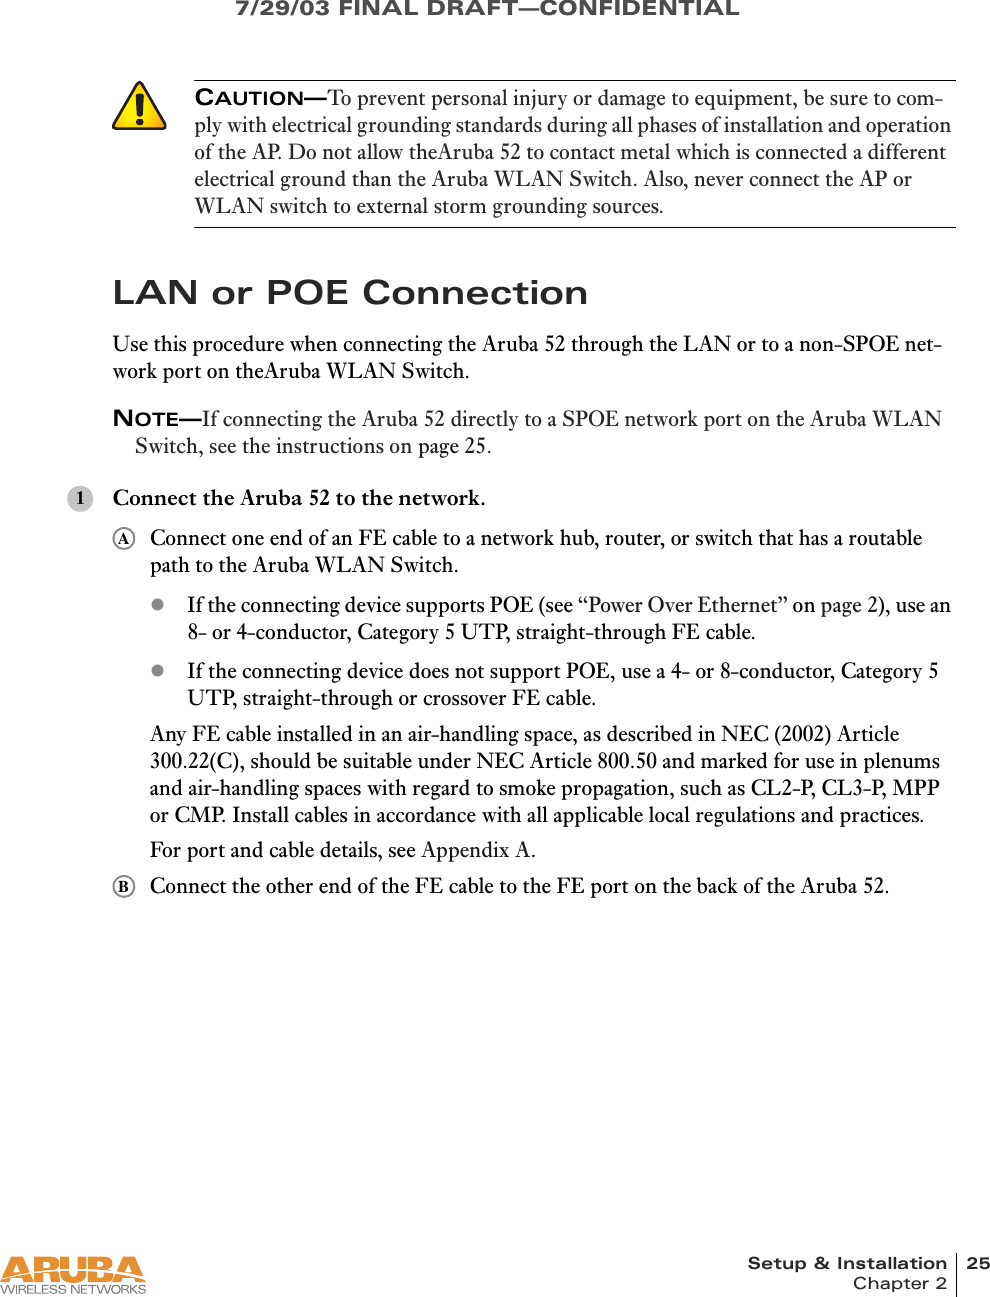 Setup &amp; Installation 25Chapter 27/29/03 FINAL DRAFT—CONFIDENTIALLAN or POE ConnectionUse this procedure when connecting the Aruba 52 through the LAN or to a non-SPOE net-work port on theAruba WLAN Switch.NOTE—If connecting the Aruba 52 directly to a SPOE network port on the Aruba WLAN Switch, see the instructions on page 25.Connect the Aruba 52 to the network.Connect one end of an FE cable to a network hub, router, or switch that has a routable path to the Aruba WLAN Switch.zIf the connecting device supports POE (see “Power Over Ethernet” on page 2), use an 8- or 4-conductor, Category 5 UTP, straight-through FE cable.zIf the connecting device does not support POE, use a 4- or 8-conductor, Category 5 UTP, straight-through or crossover FE cable.Any FE cable installed in an air-handling space, as described in NEC (2002) Article 300.22(C), should be suitable under NEC Article 800.50 and marked for use in plenums and air-handling spaces with regard to smoke propagation, such as CL2-P, CL3-P, MPP or CMP. Install cables in accordance with all applicable local regulations and practices.For port and cable details, see Appendix A.Connect the other end of the FE cable to the FE port on the back of the Aruba 52.CAUTION—To prevent personal injury or damage to equipment, be sure to com-ply with electrical grounding standards during all phases of installation and operation of the AP. Do not allow theAruba 52 to contact metal which is connected a different electrical ground than the Aruba WLAN Switch. Also, never connect the AP or WLAN switch to external storm grounding sources.1AB